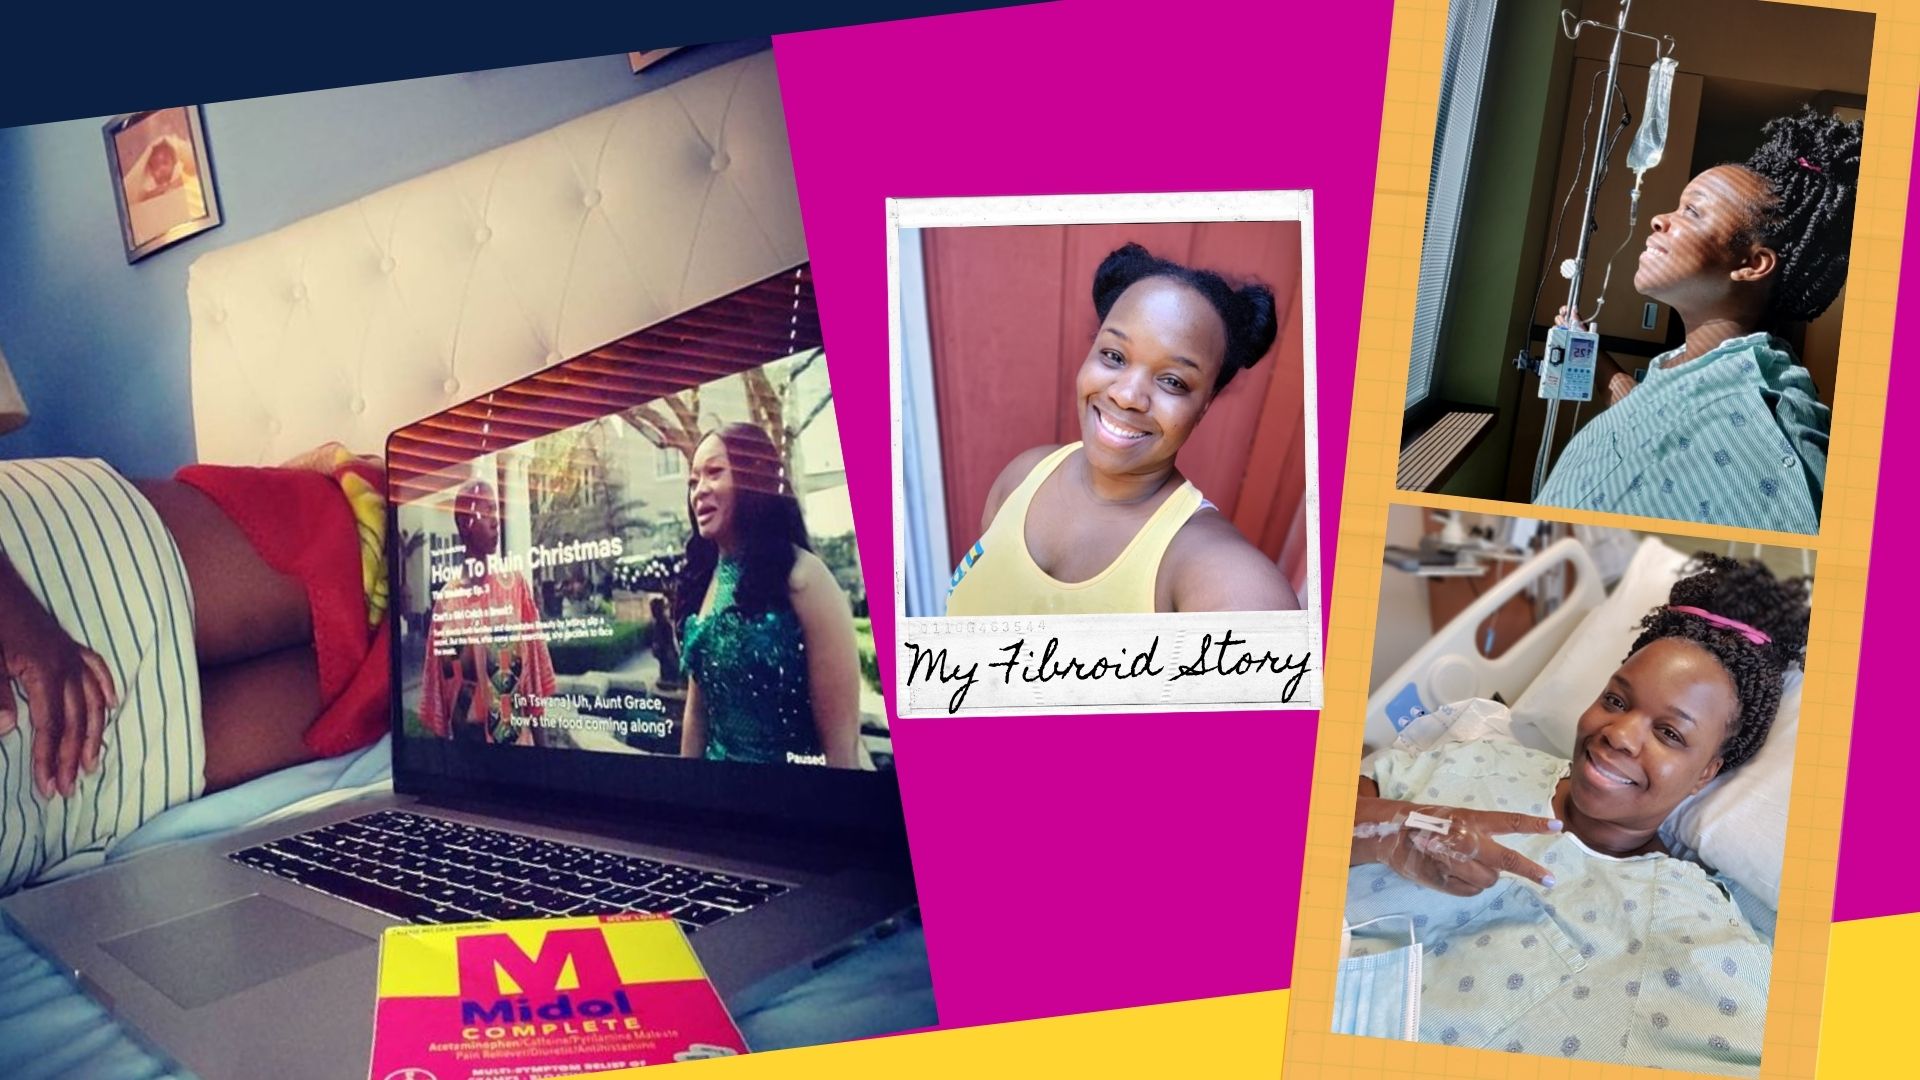 My Fibroid Story… and the 3 concerns I had about treatment